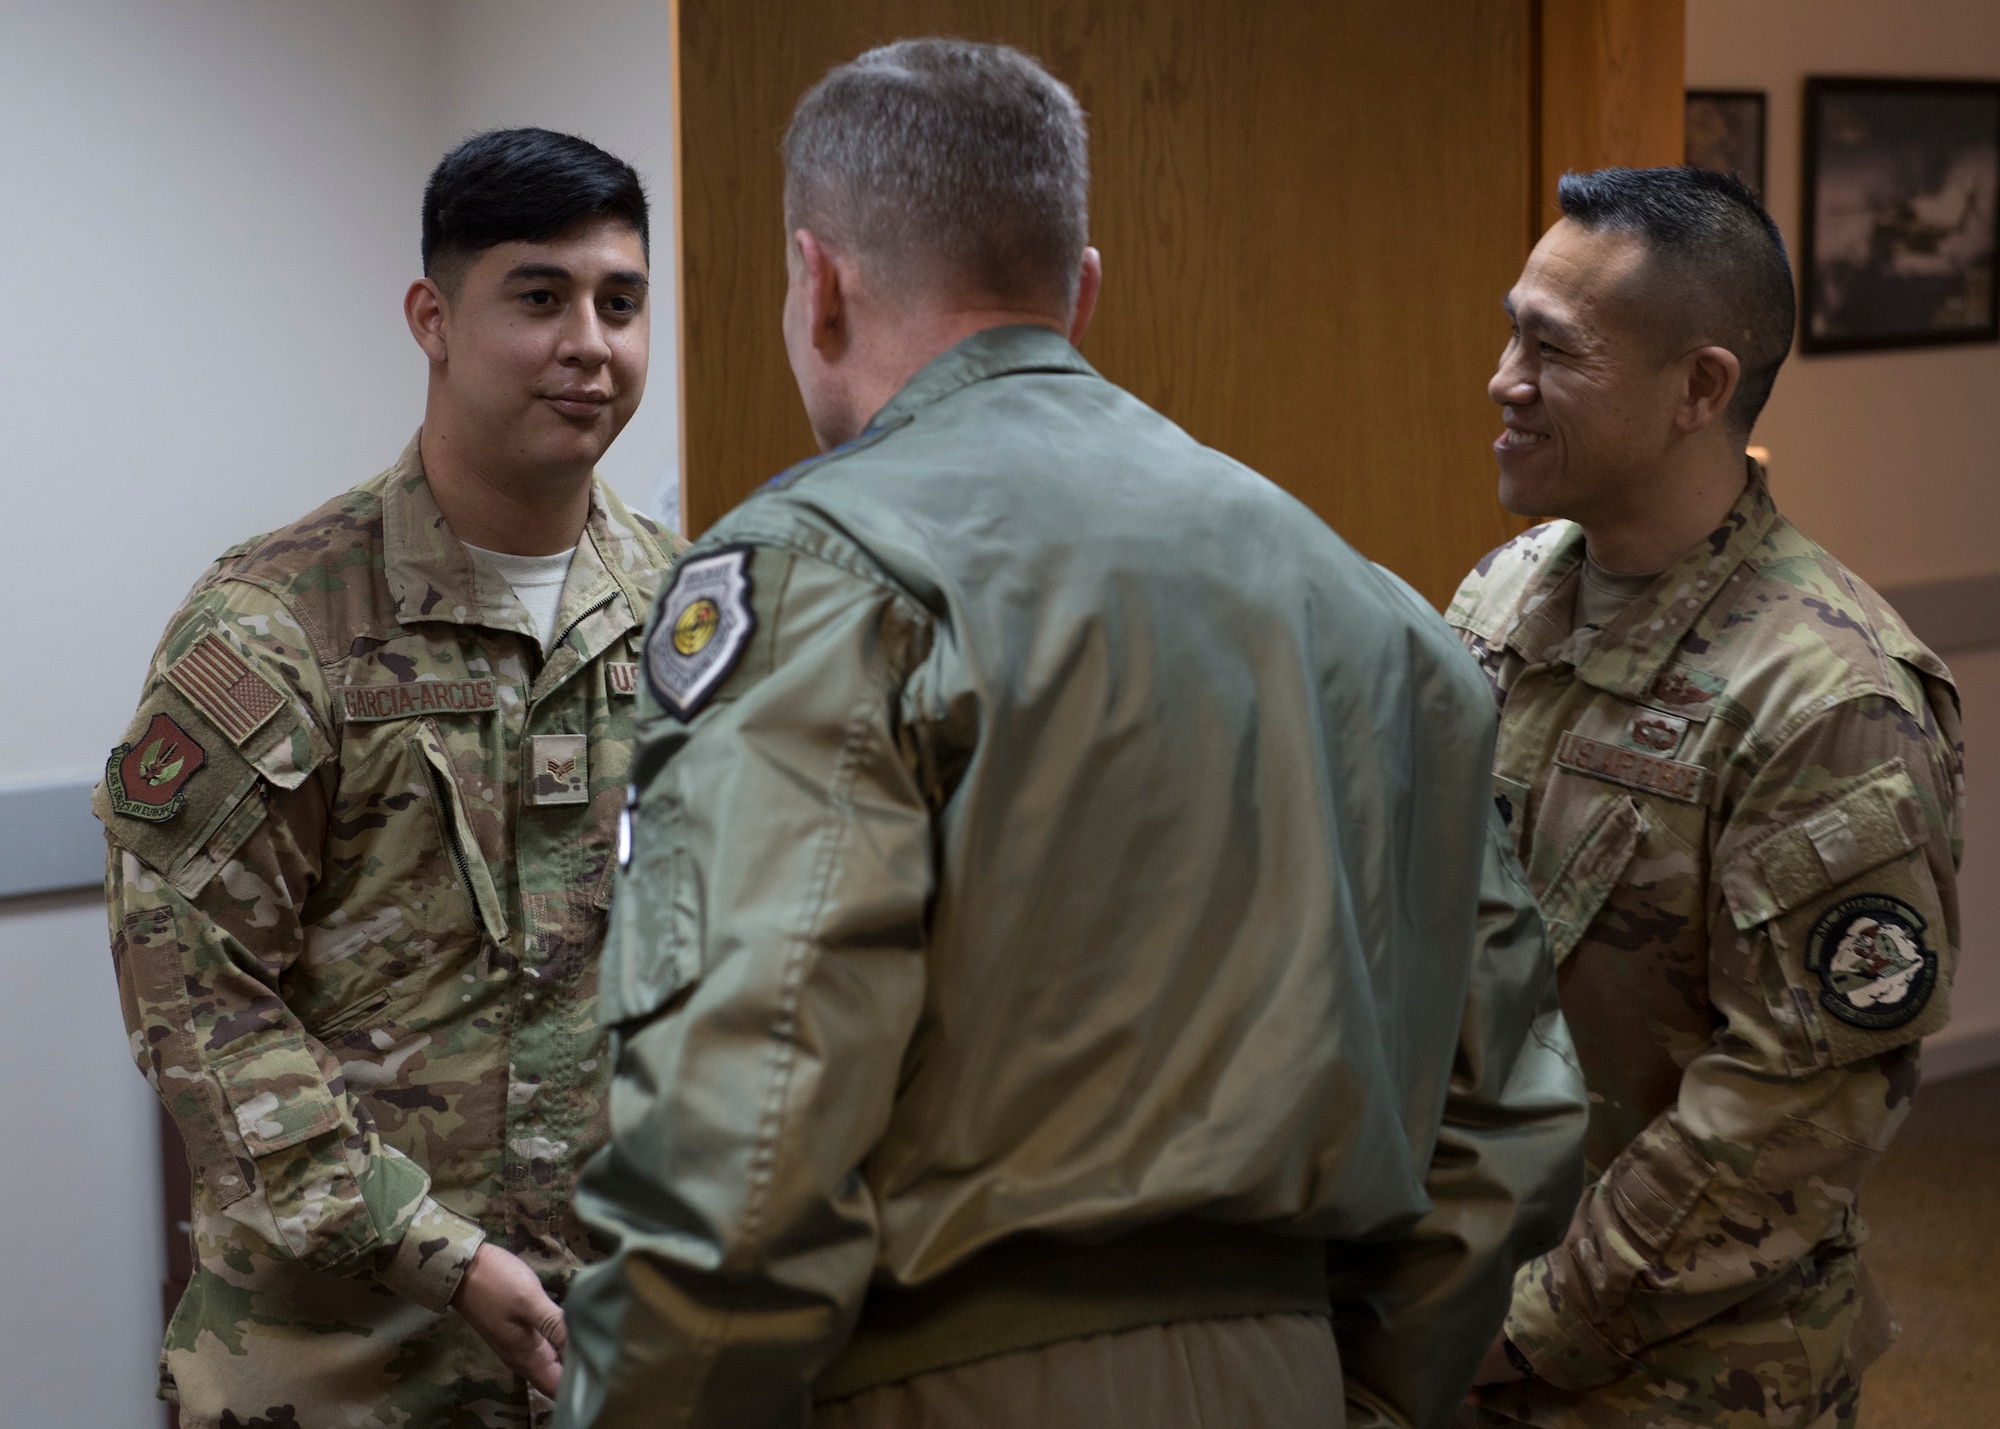 U.S. Air Force Senior Airman George Garcia-Arcos receives a coin from U.S. Air Force Gen. Tod D. Wolters.